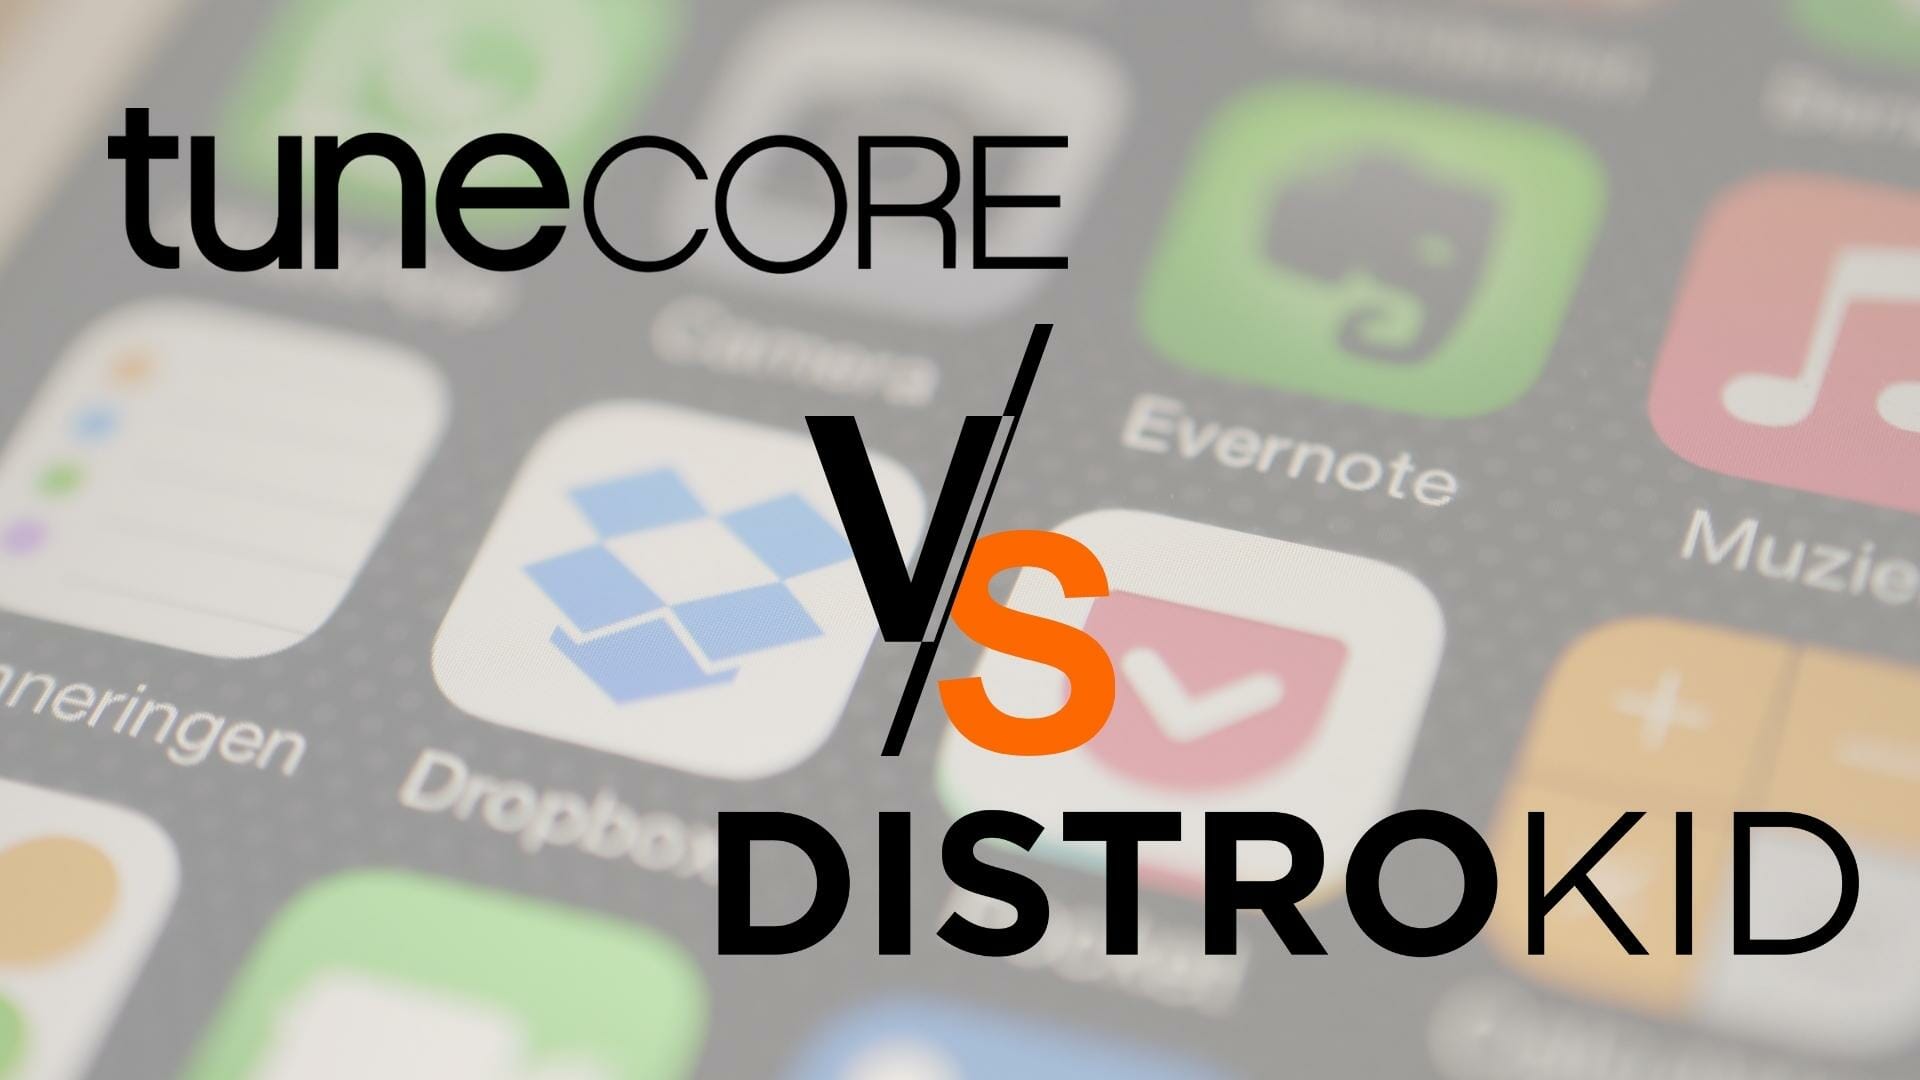 Tunecore vs Distrokid what’s the best choice for your music